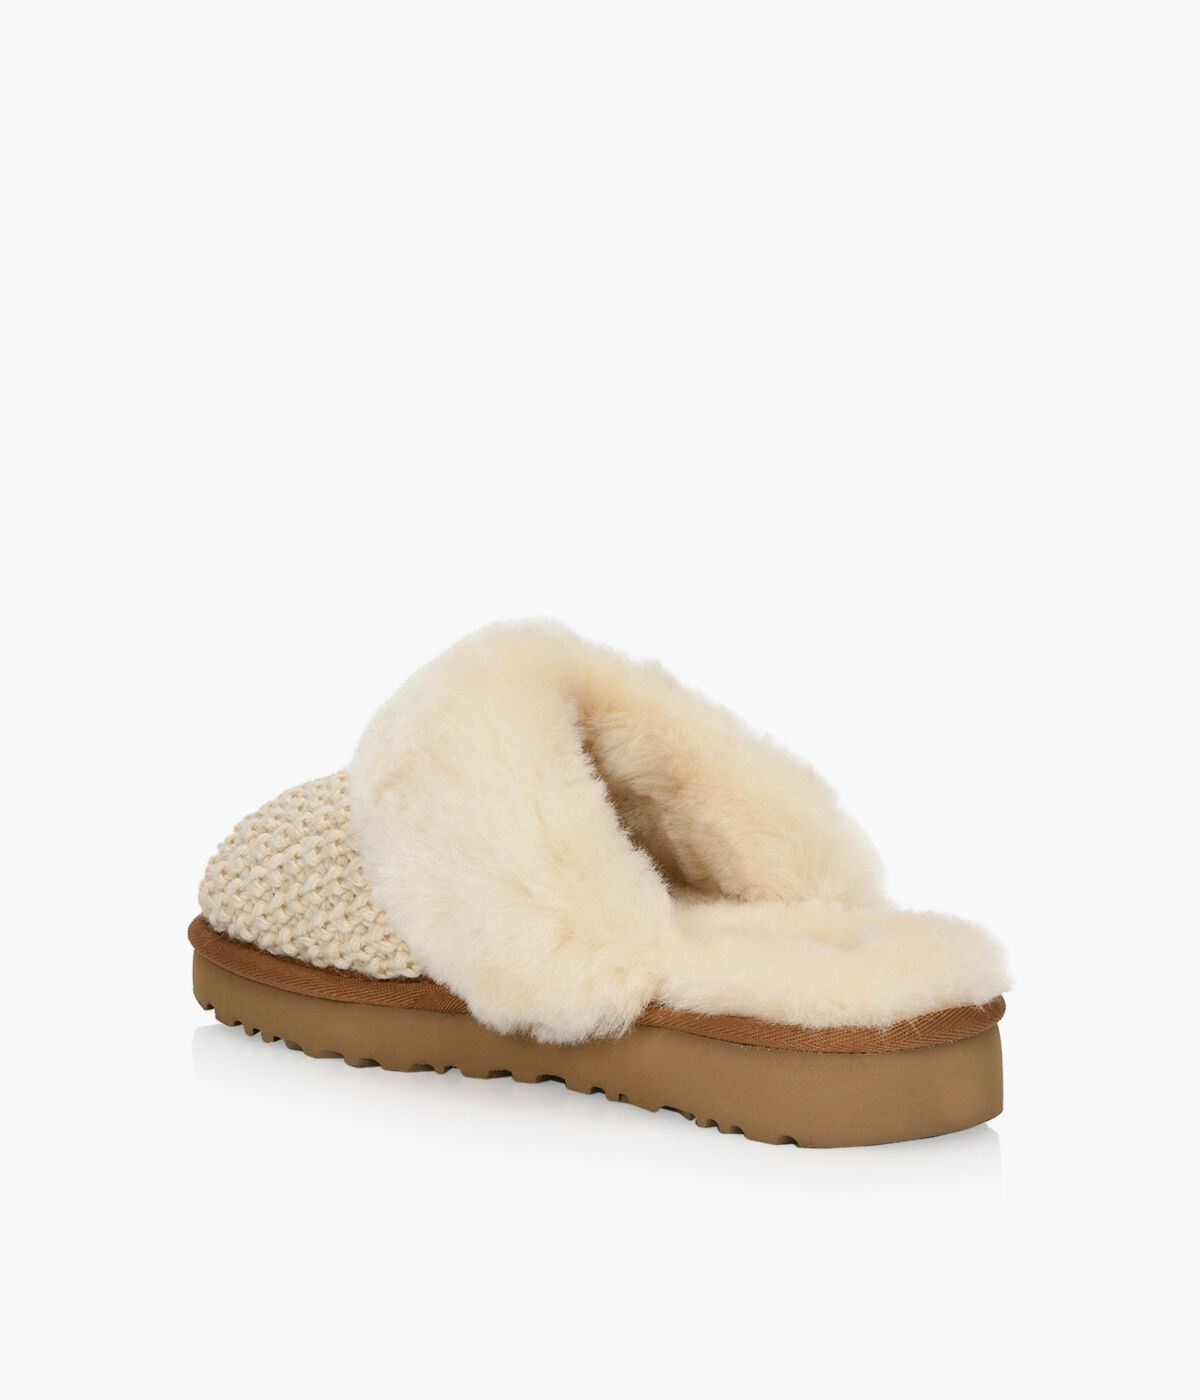 UGG | Shoes | Ugg Cozy Knit Shearling New Slippers Cream | Poshmark